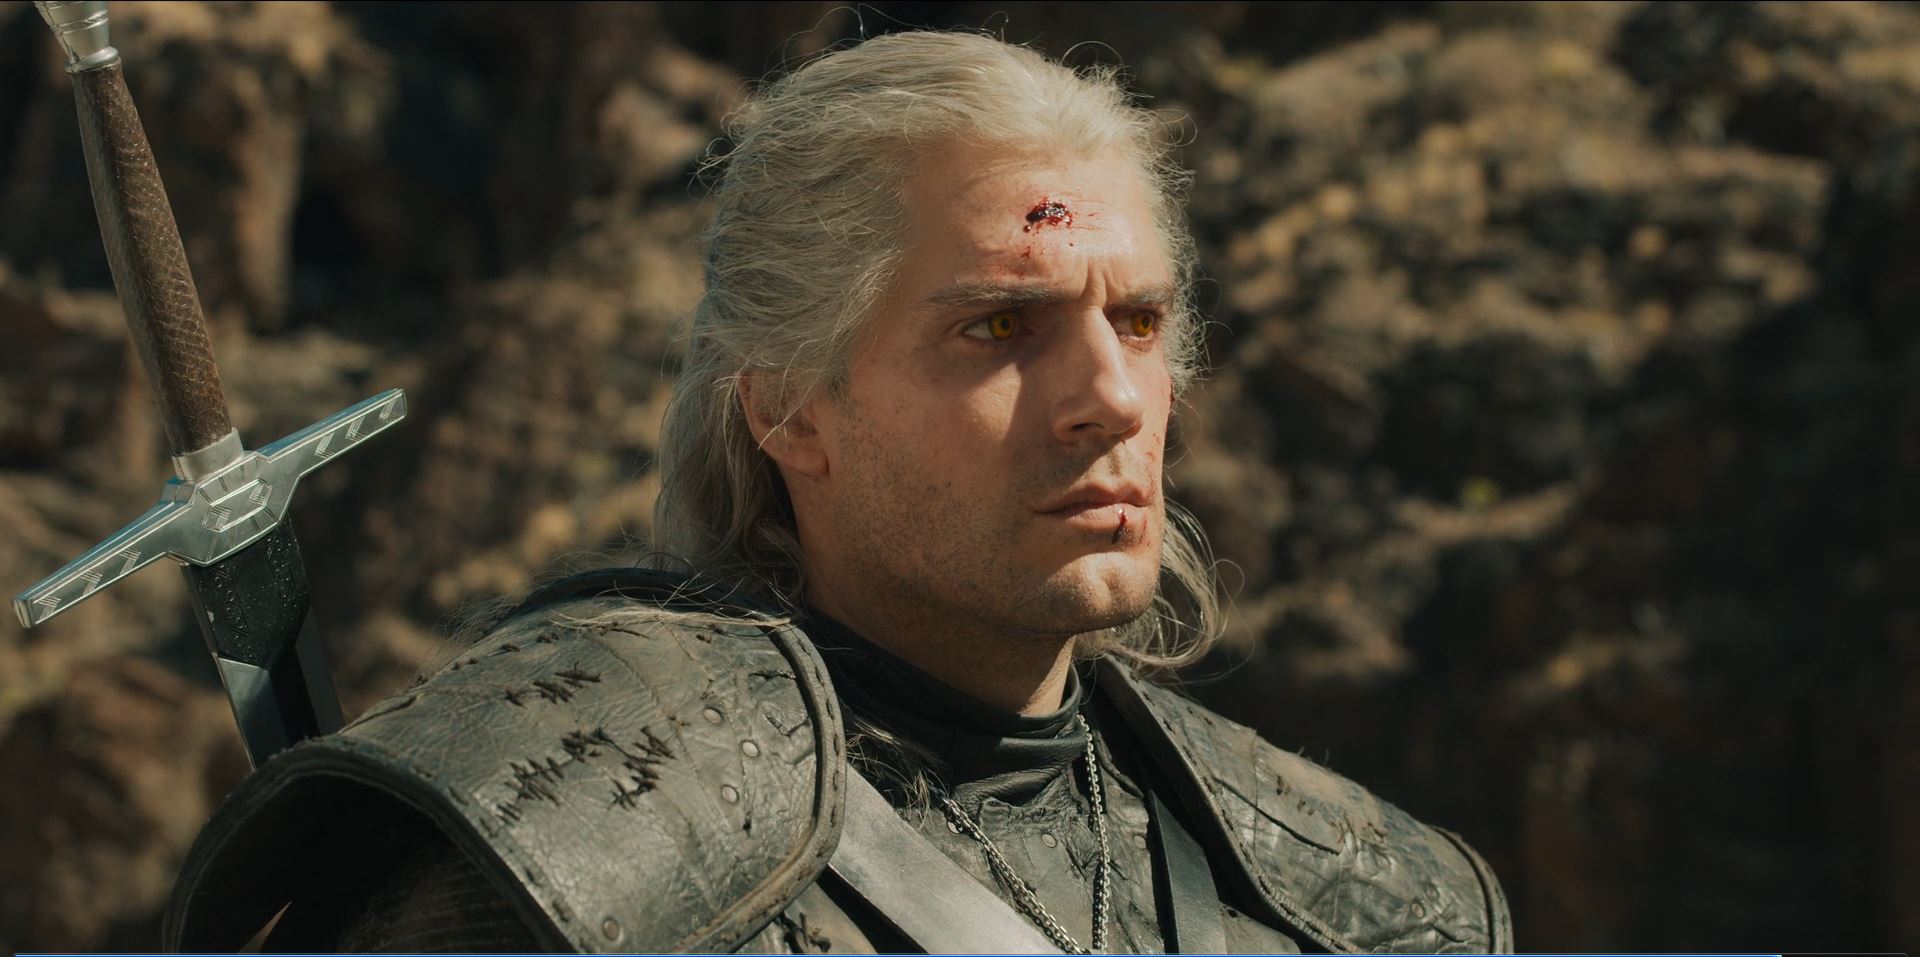 The Witcher - Henry Cavill as Geralt of Rivia